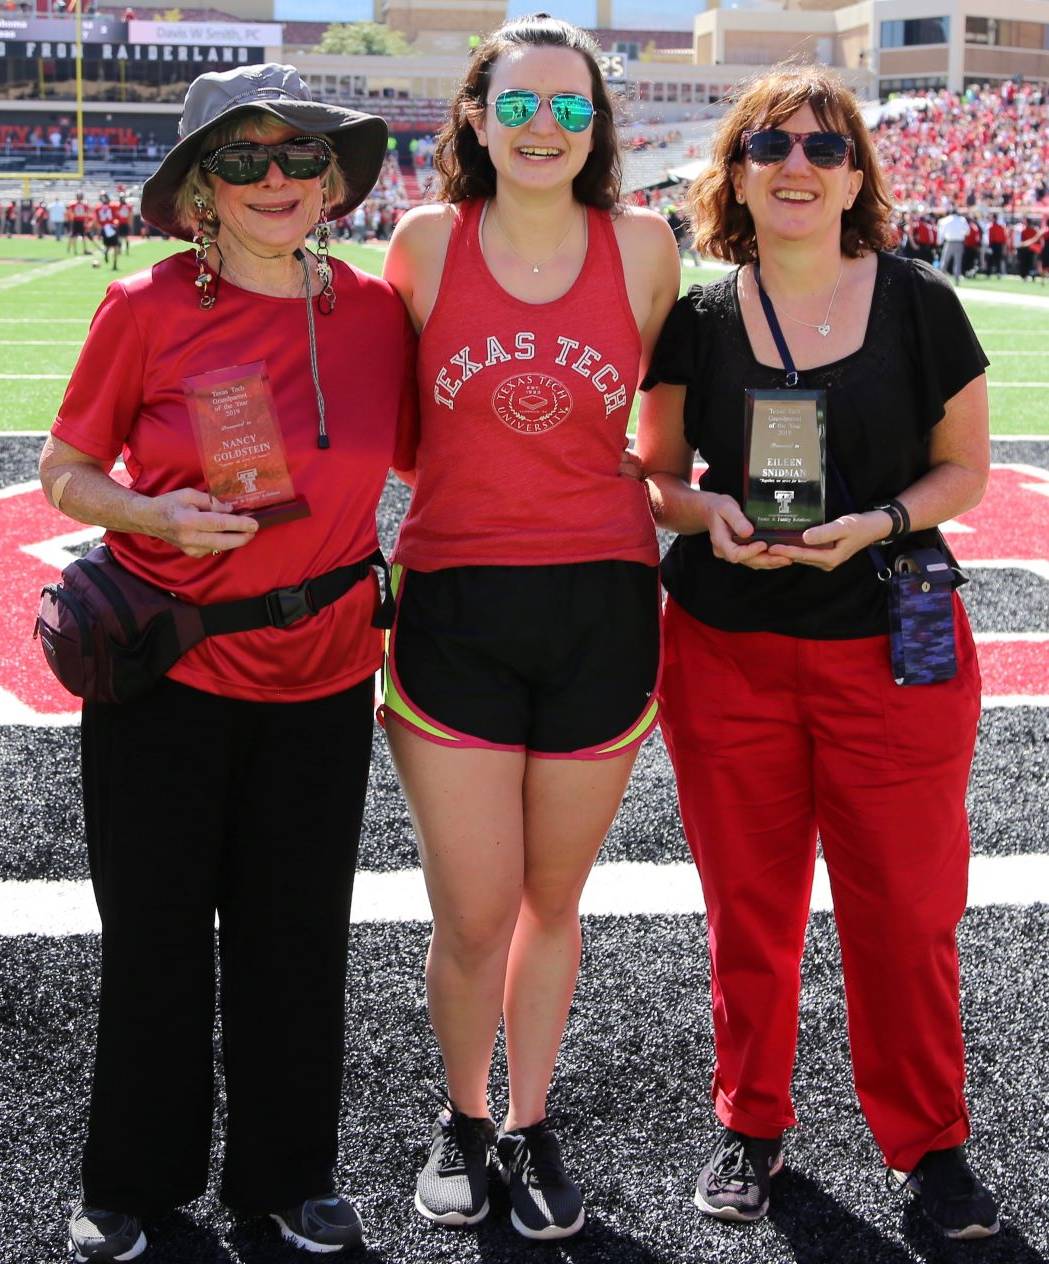 Grandparents of the Year awarded plaque during the Family Weekend football game